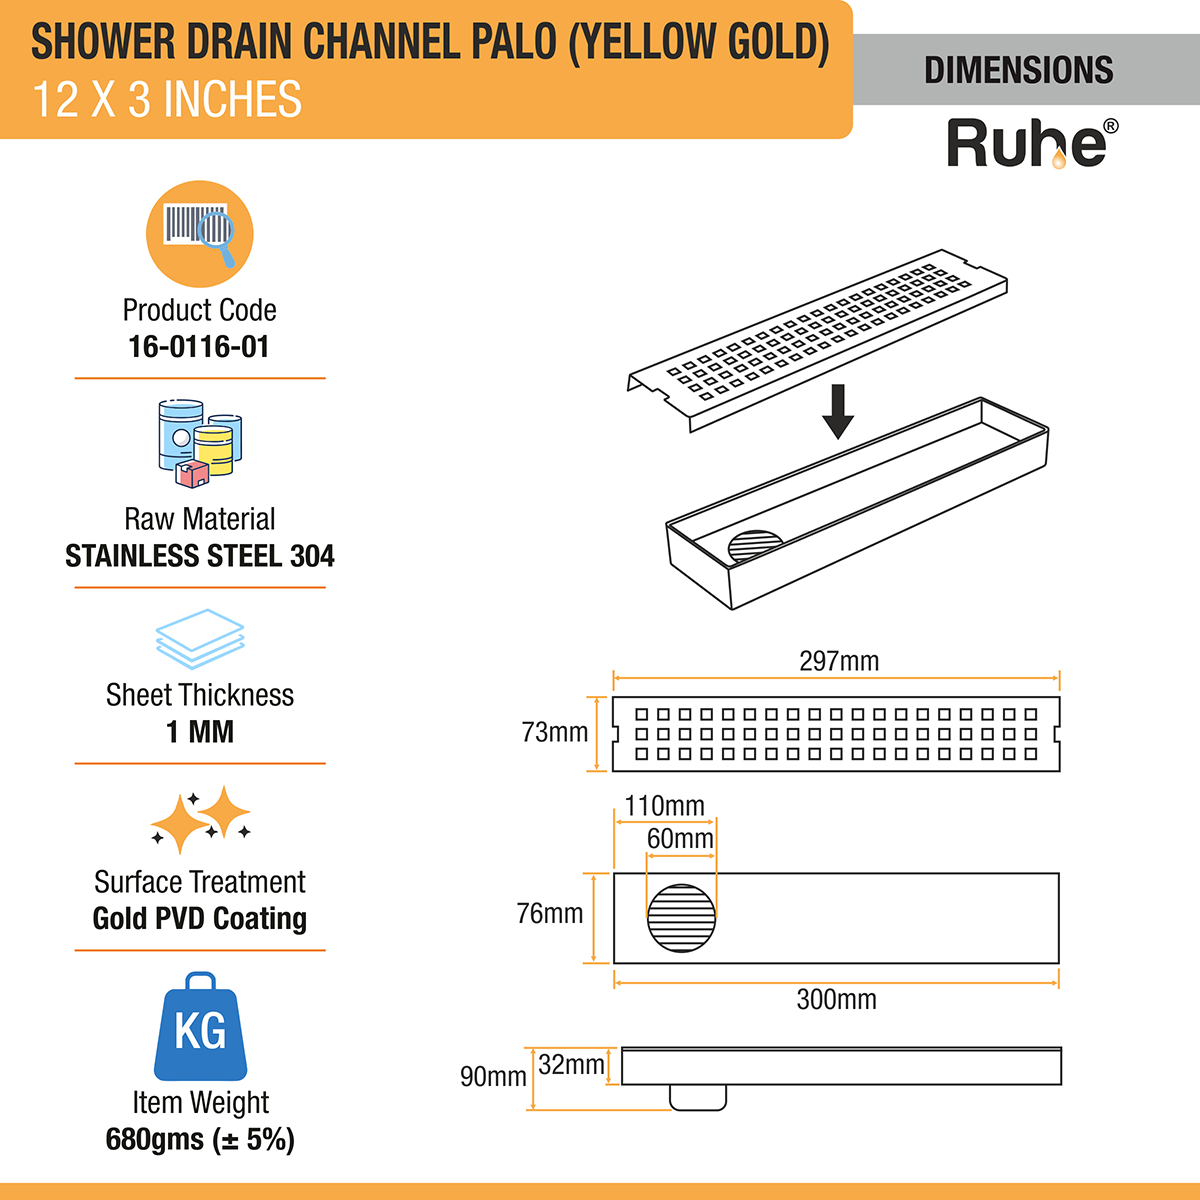 Palo Shower Drain Channel (12 x 3 Inches) YELLOW GOLD dimensions and size